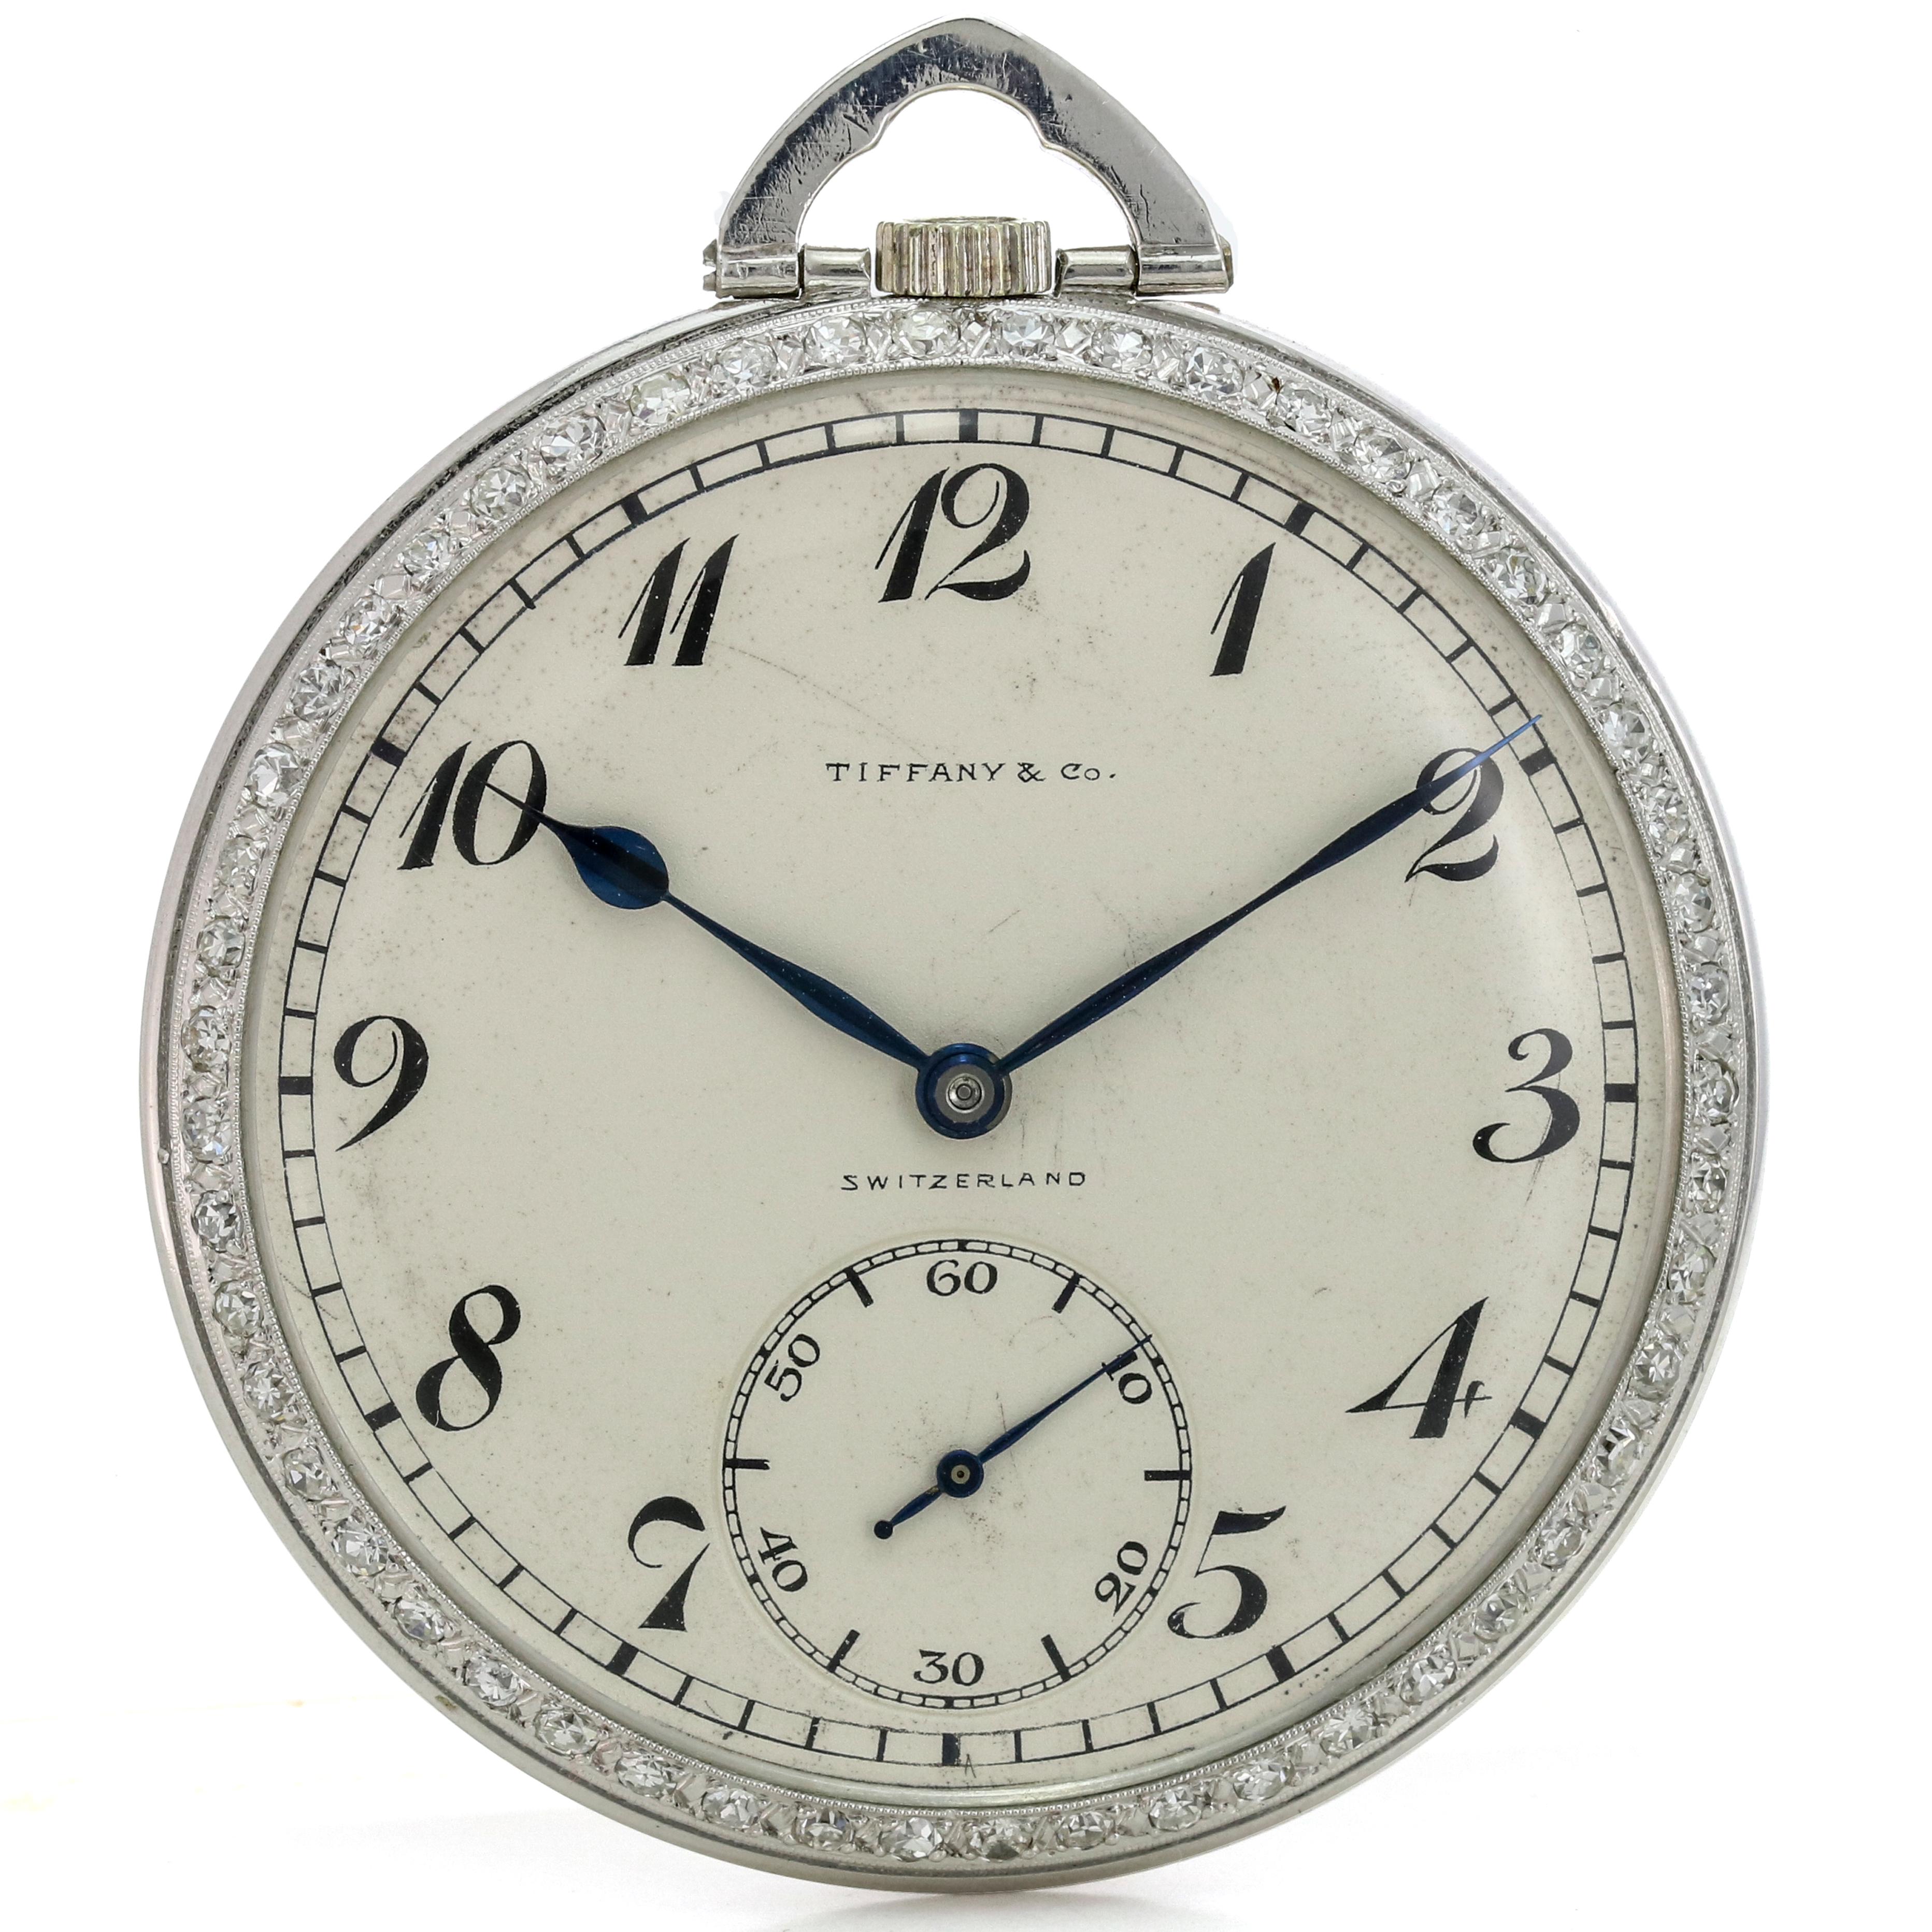 Tiffany & Co. Platinum Pocket Watch with Diamond Bezel Powered by Patek Philippe For Sale